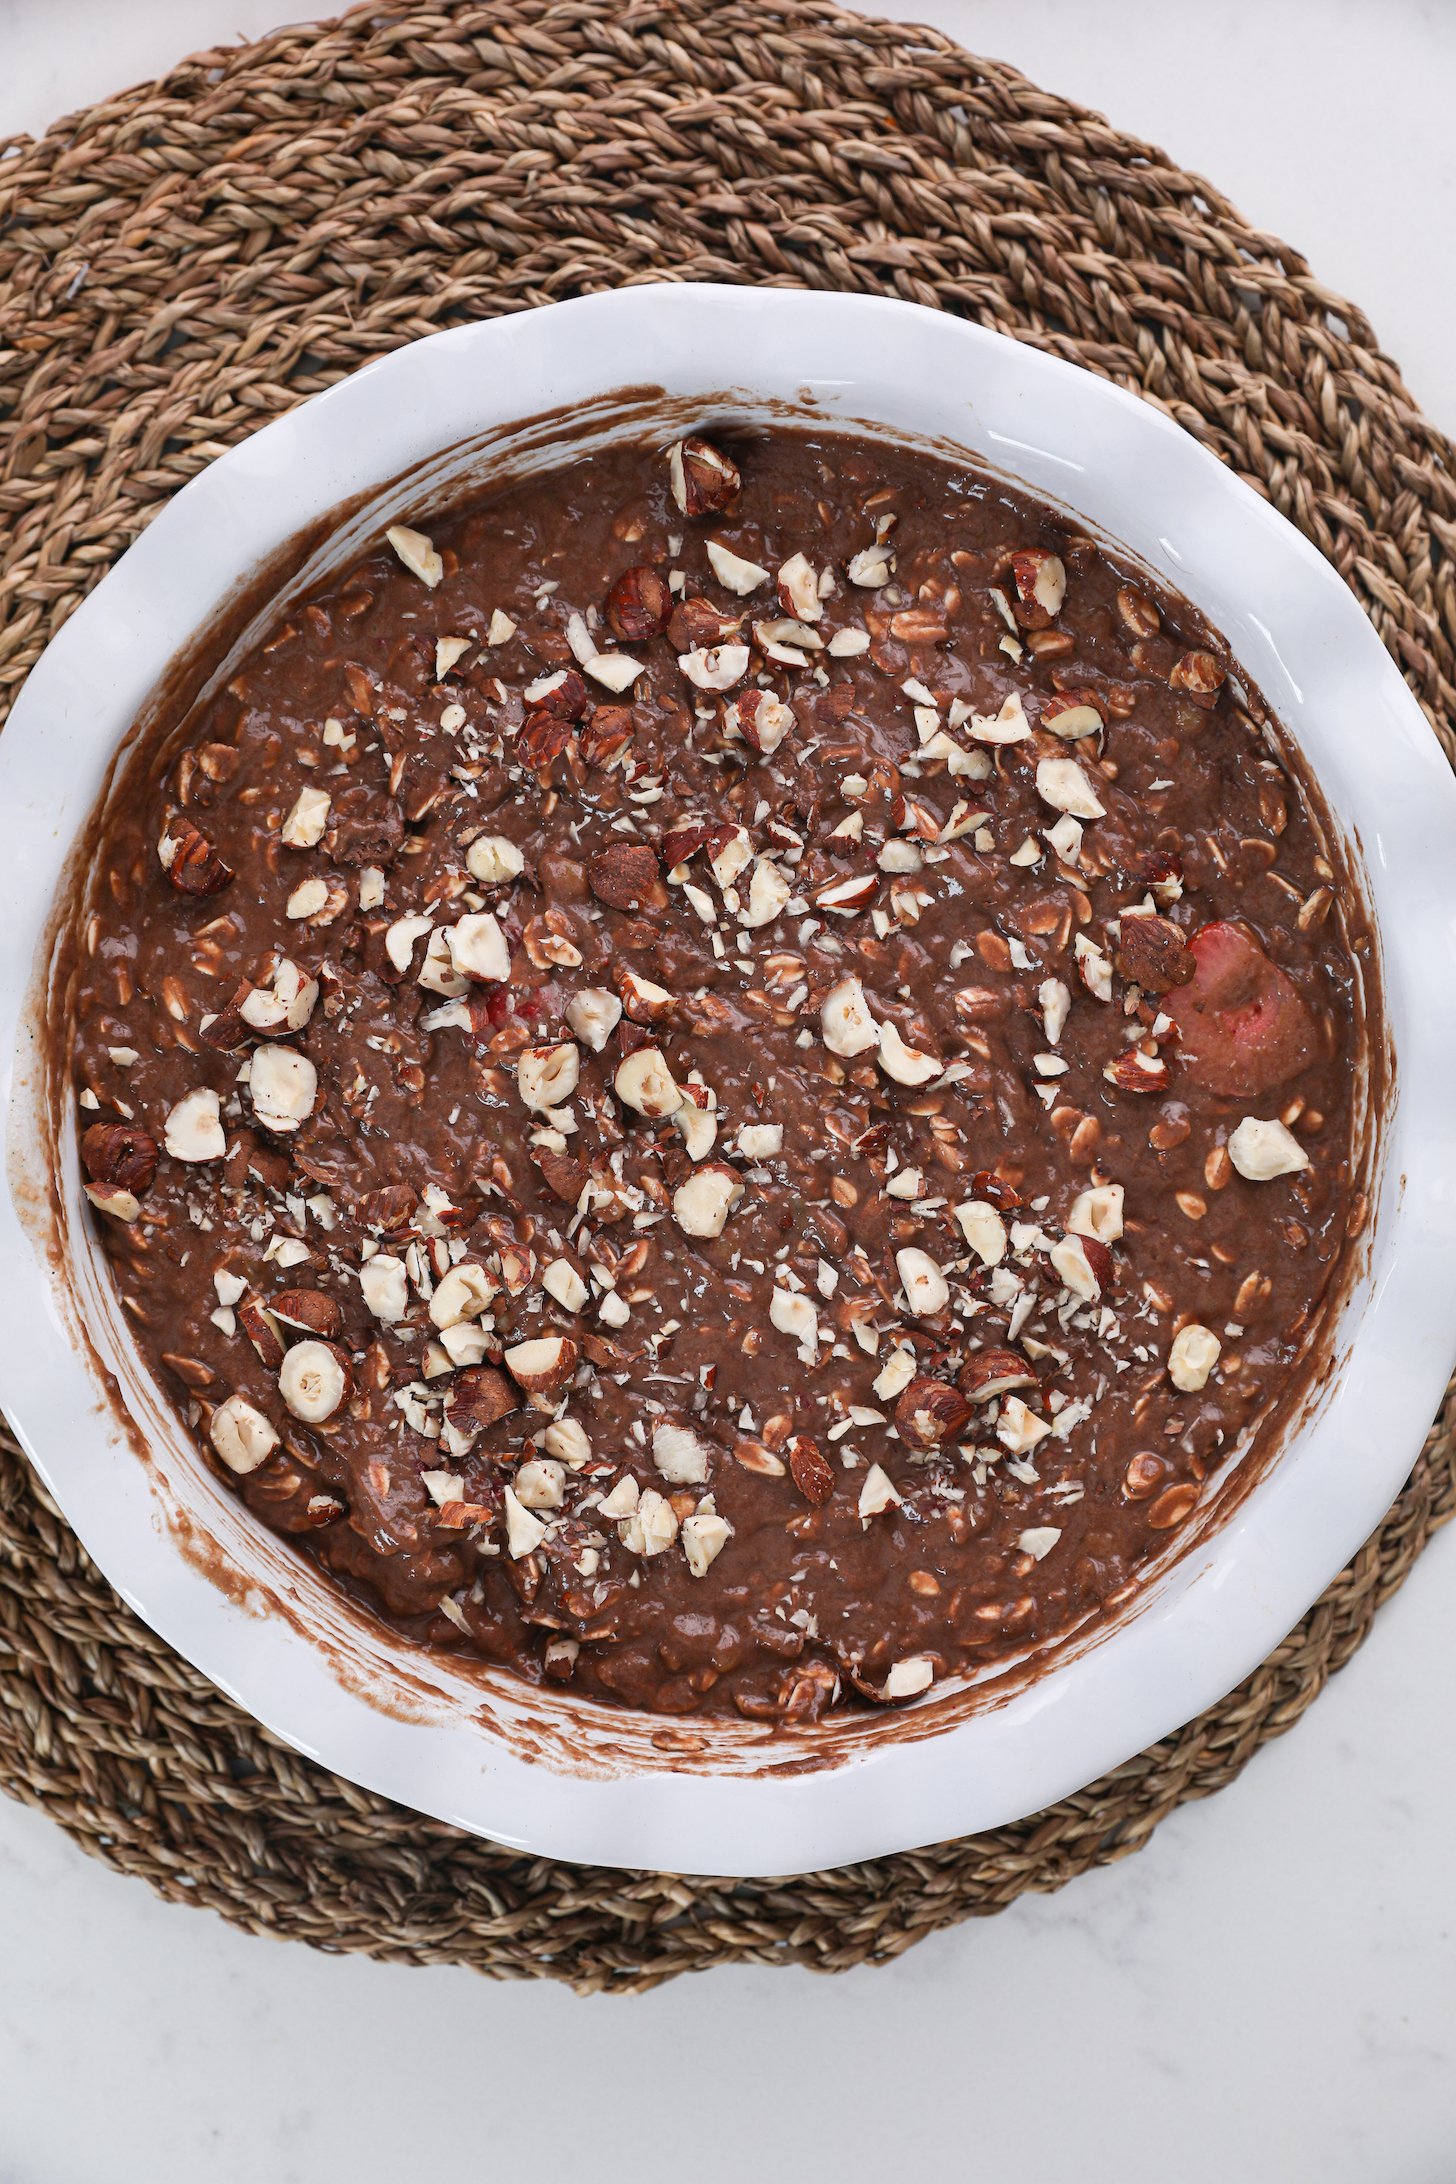 Top view of a bowl of chocolate and oats pudding topped with nuts.